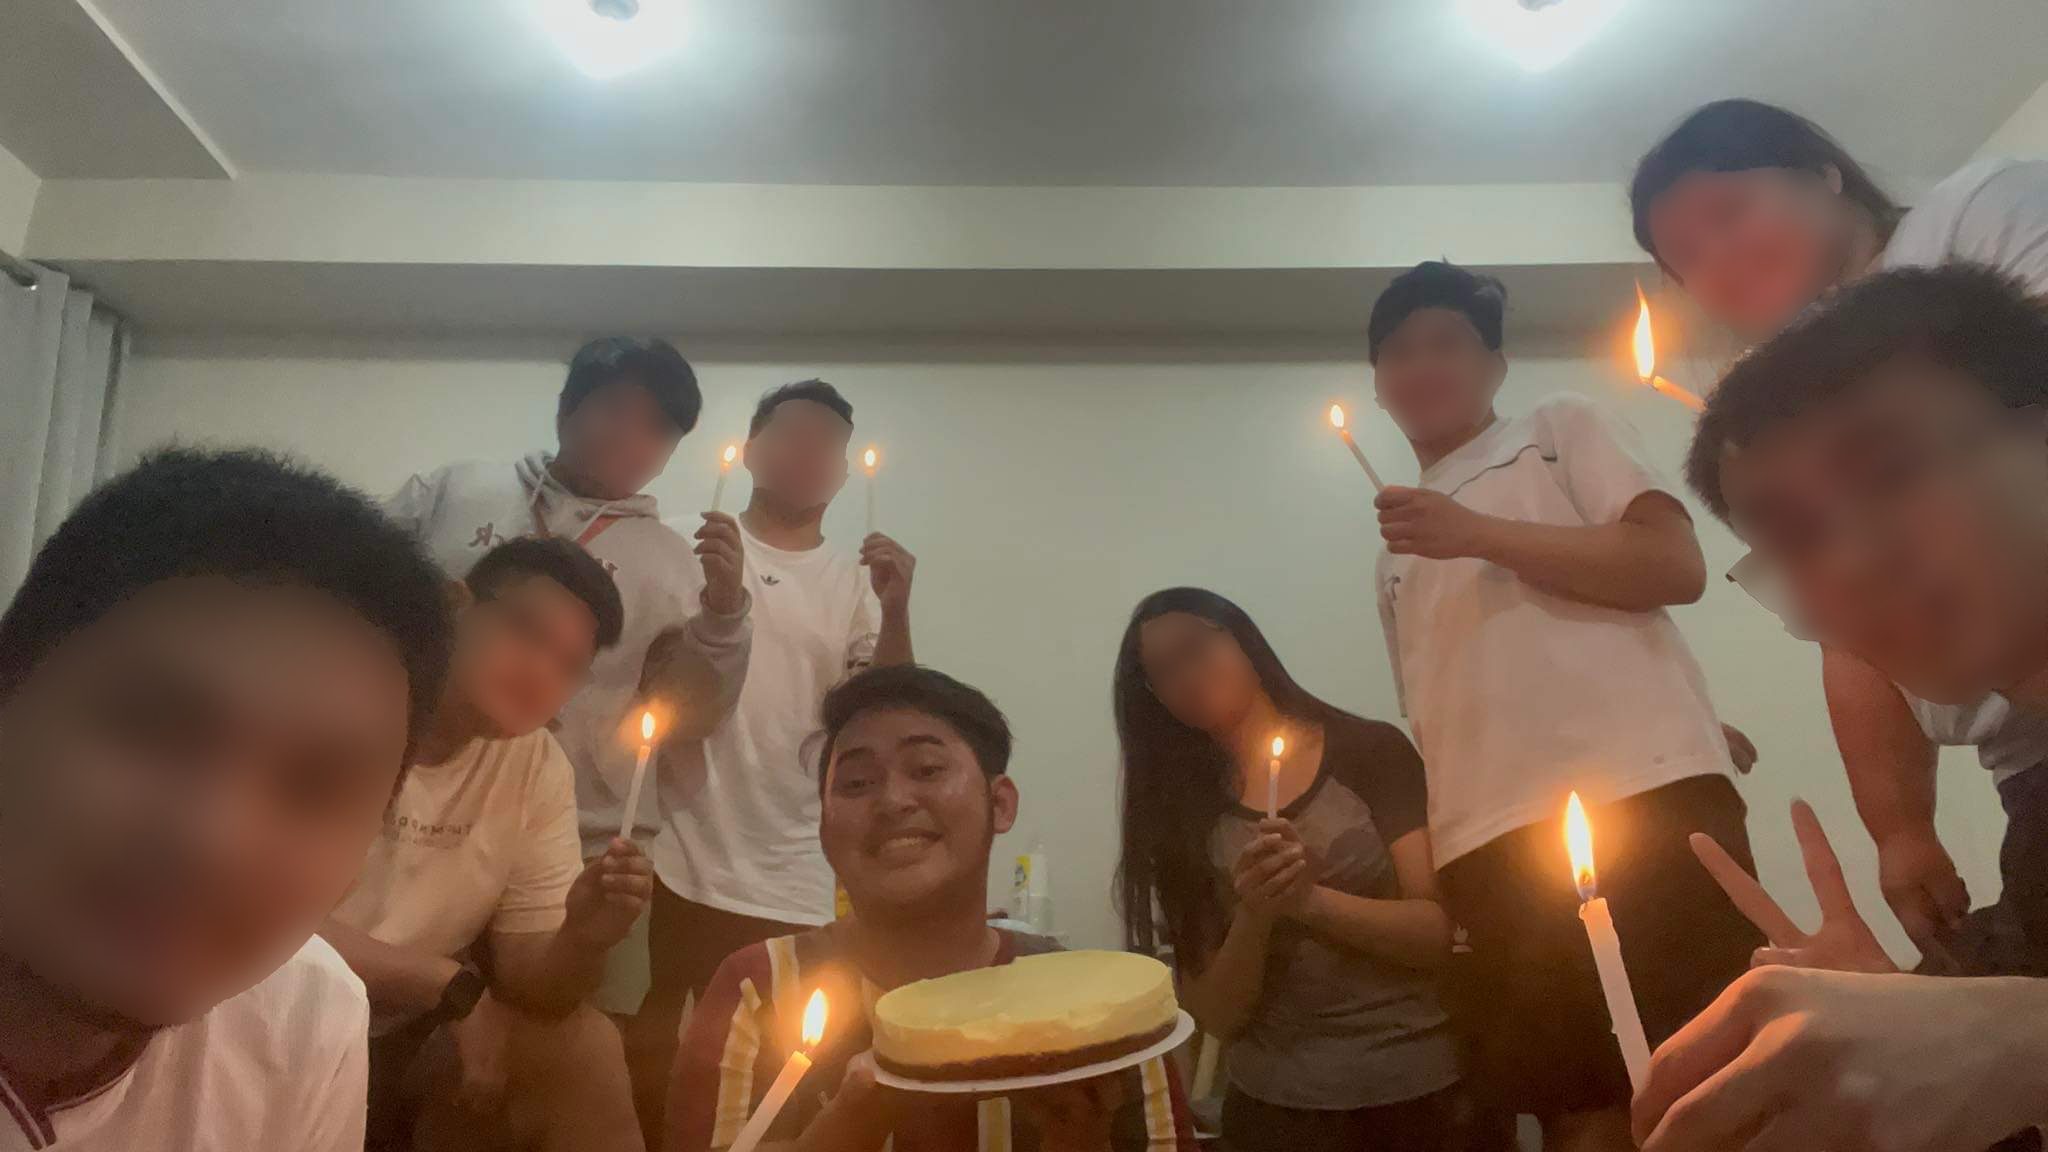 John Matthew Salilig, alleged victim of university hazing rituals in the Philippines, celebrates his birthday with friends. Photo: Supplied